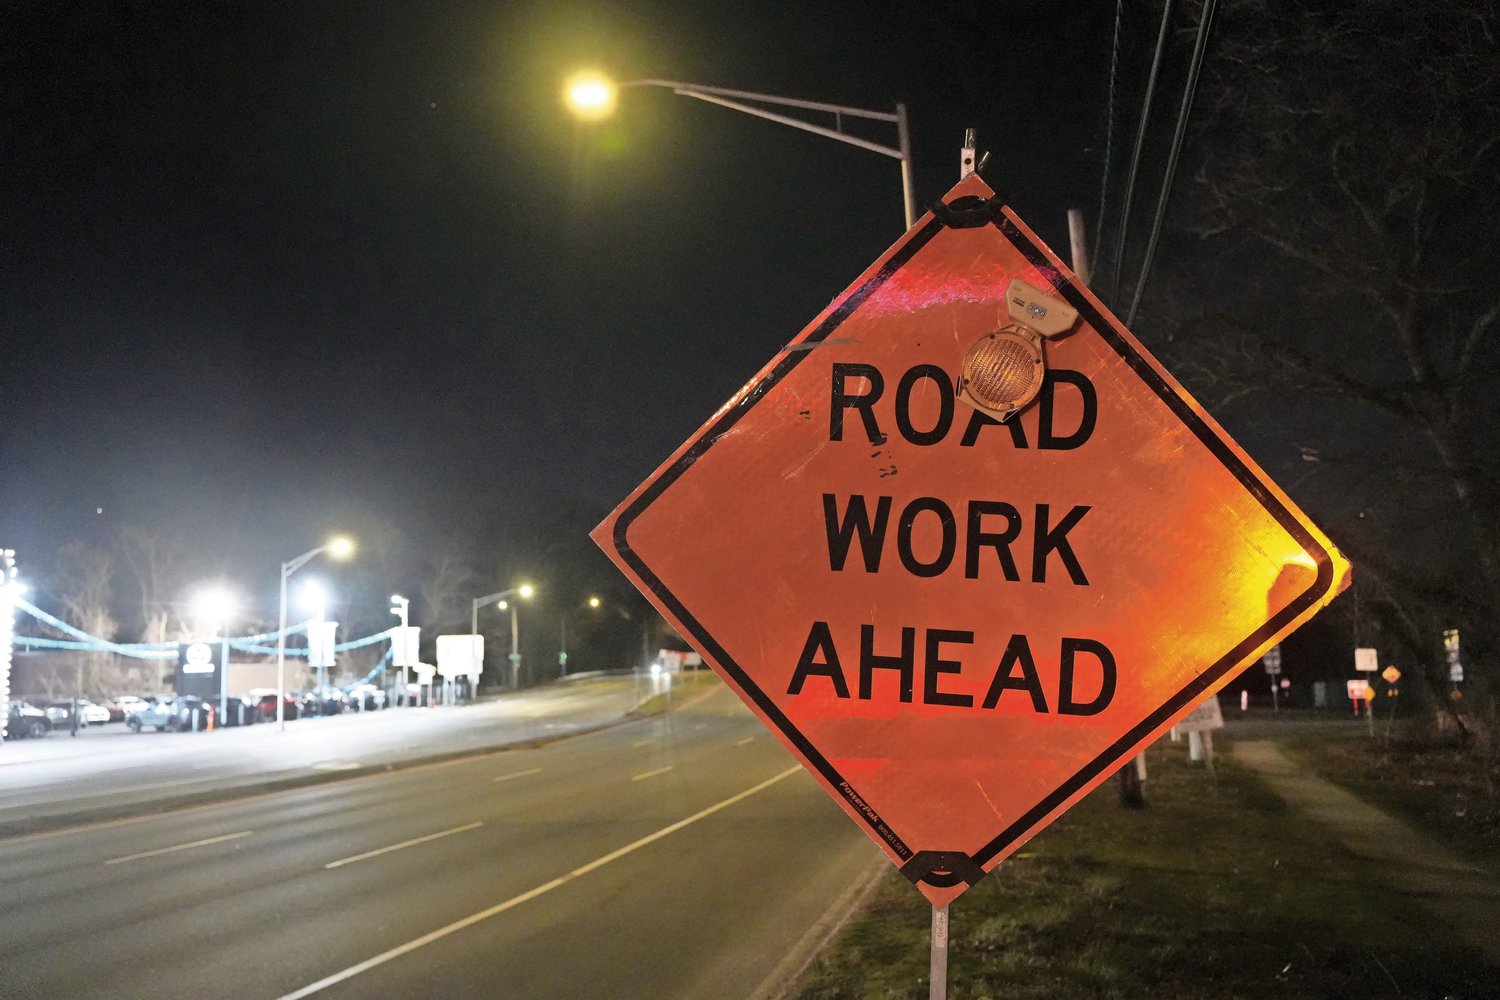 The night work on Sunrise Highway in Wantagh has been disrupting residents’ sleep and causing health and safety issues, they say.